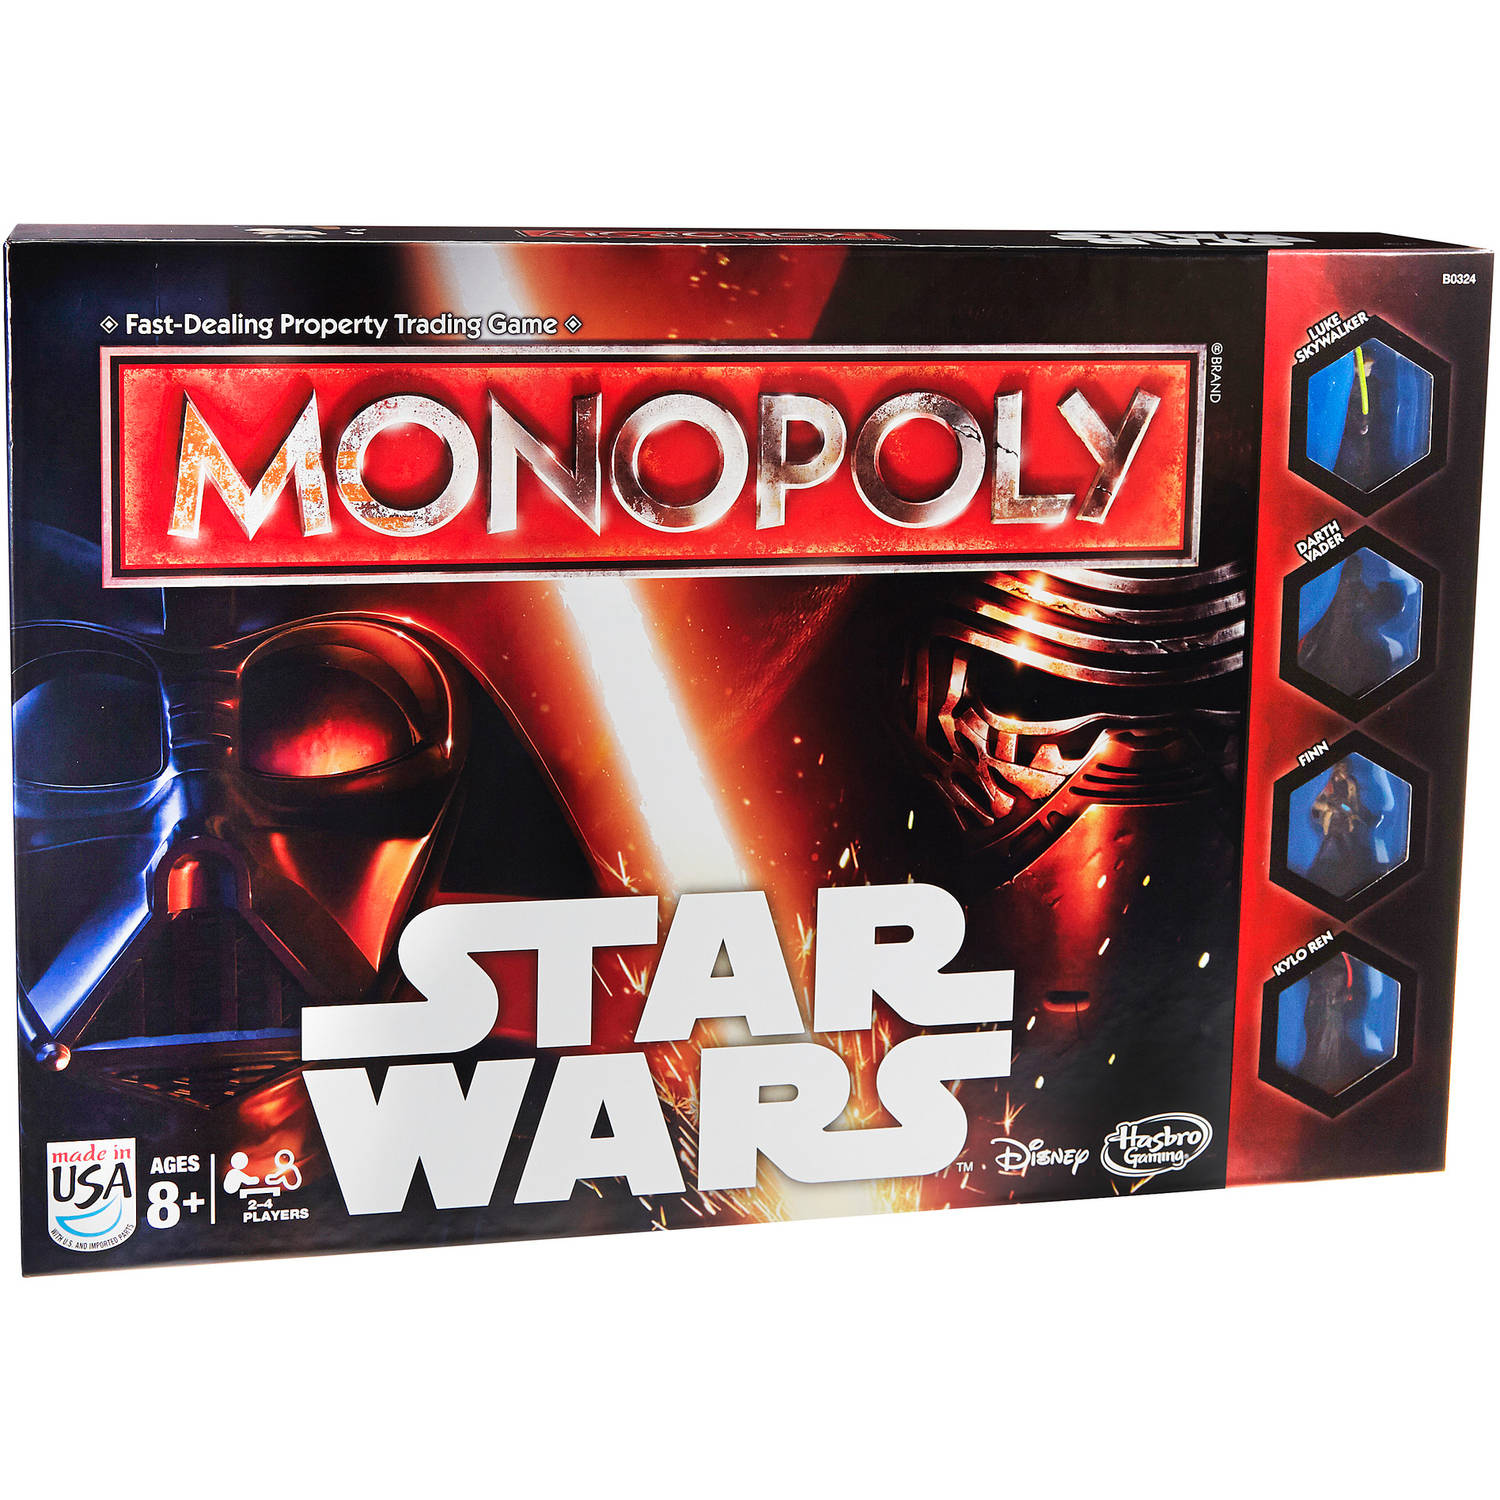 Monopoly Game Star Wars - image 4 of 17